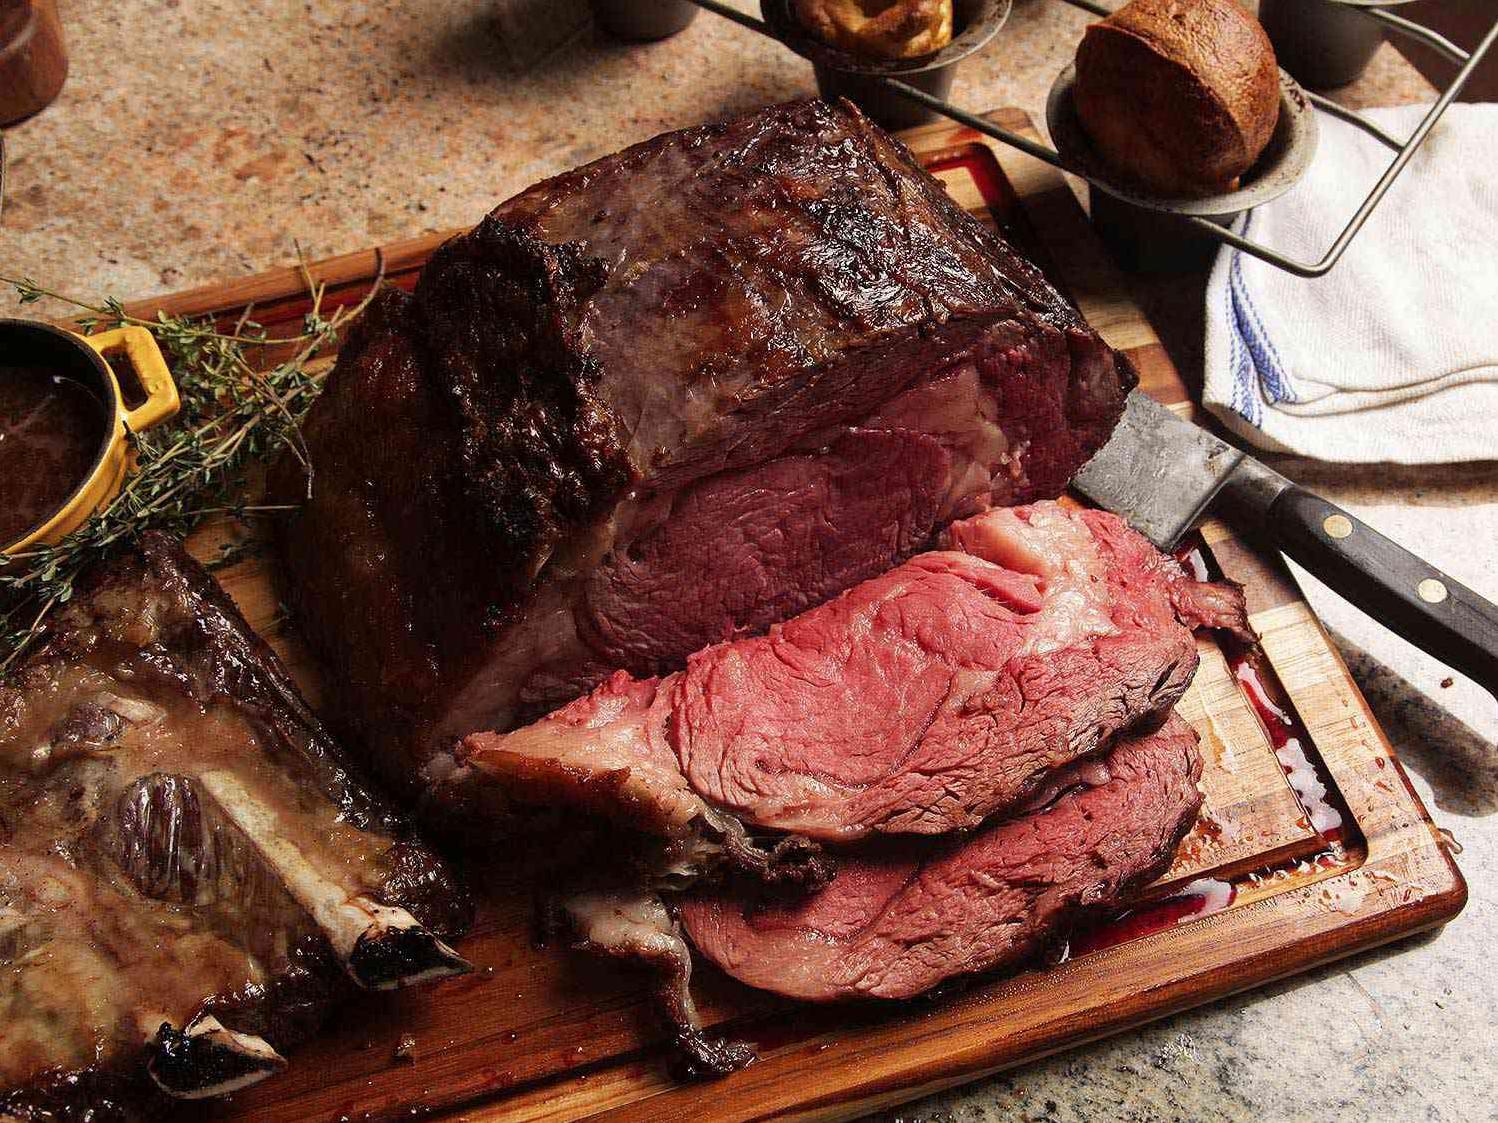  Juicy and tender, this Prime Rib is the ultimate indulgence for meat lovers